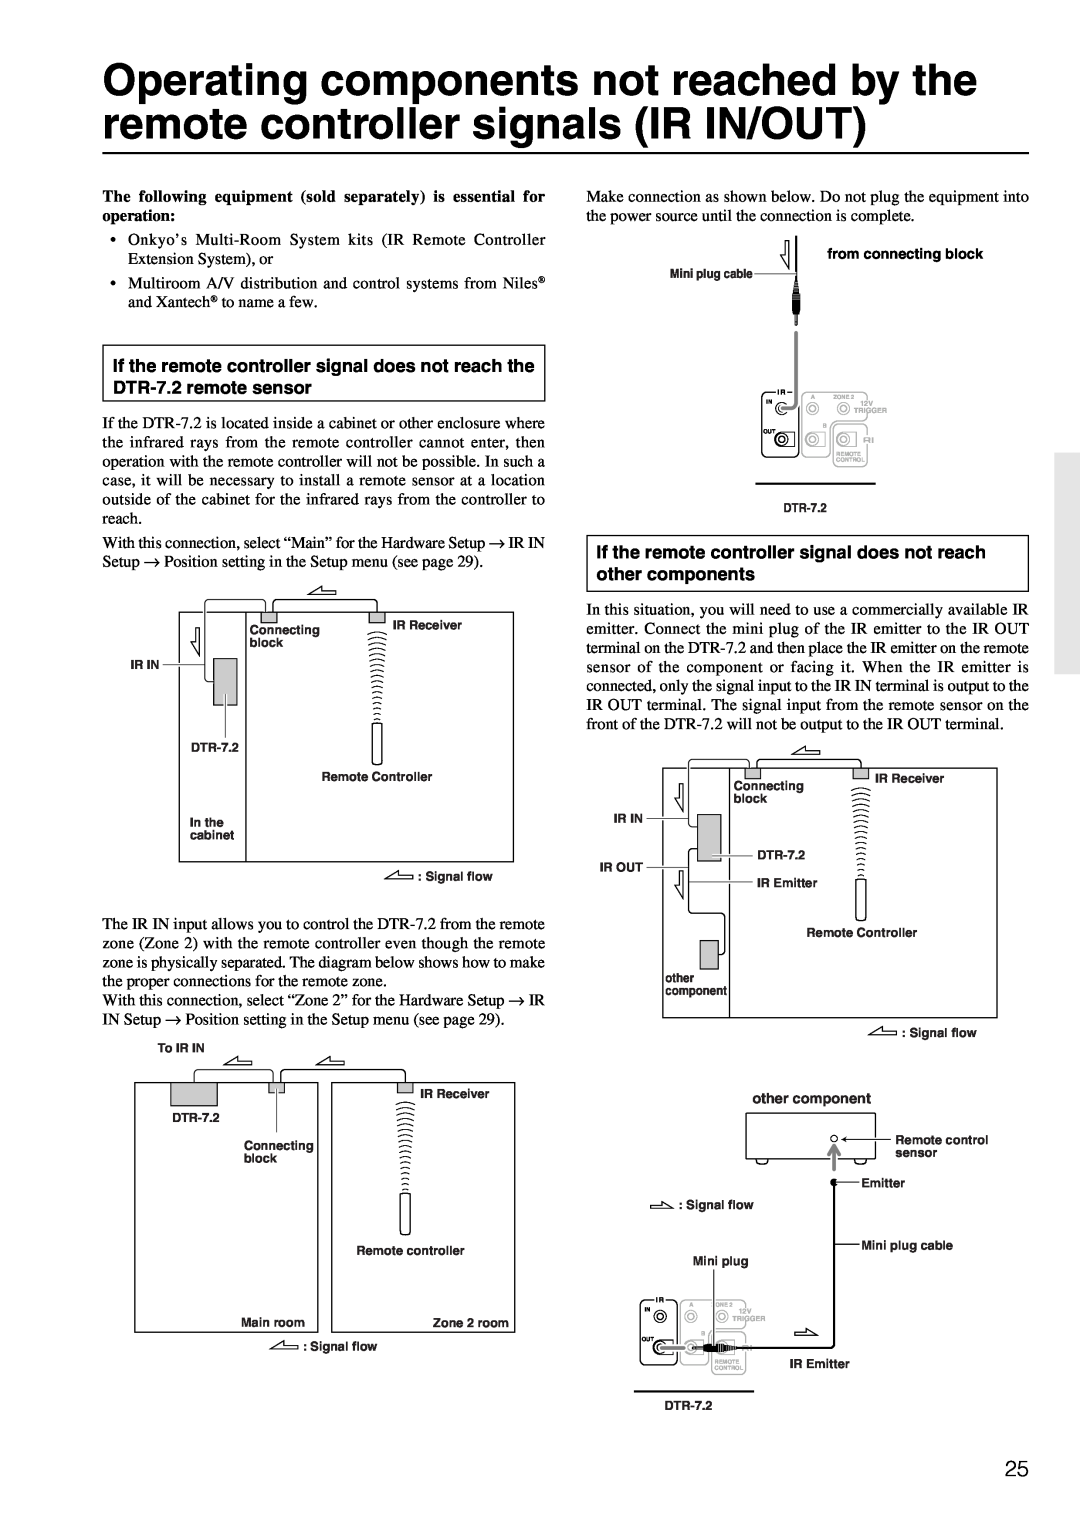 Integra DTR-7.2 instruction manual from connecting block, other component 